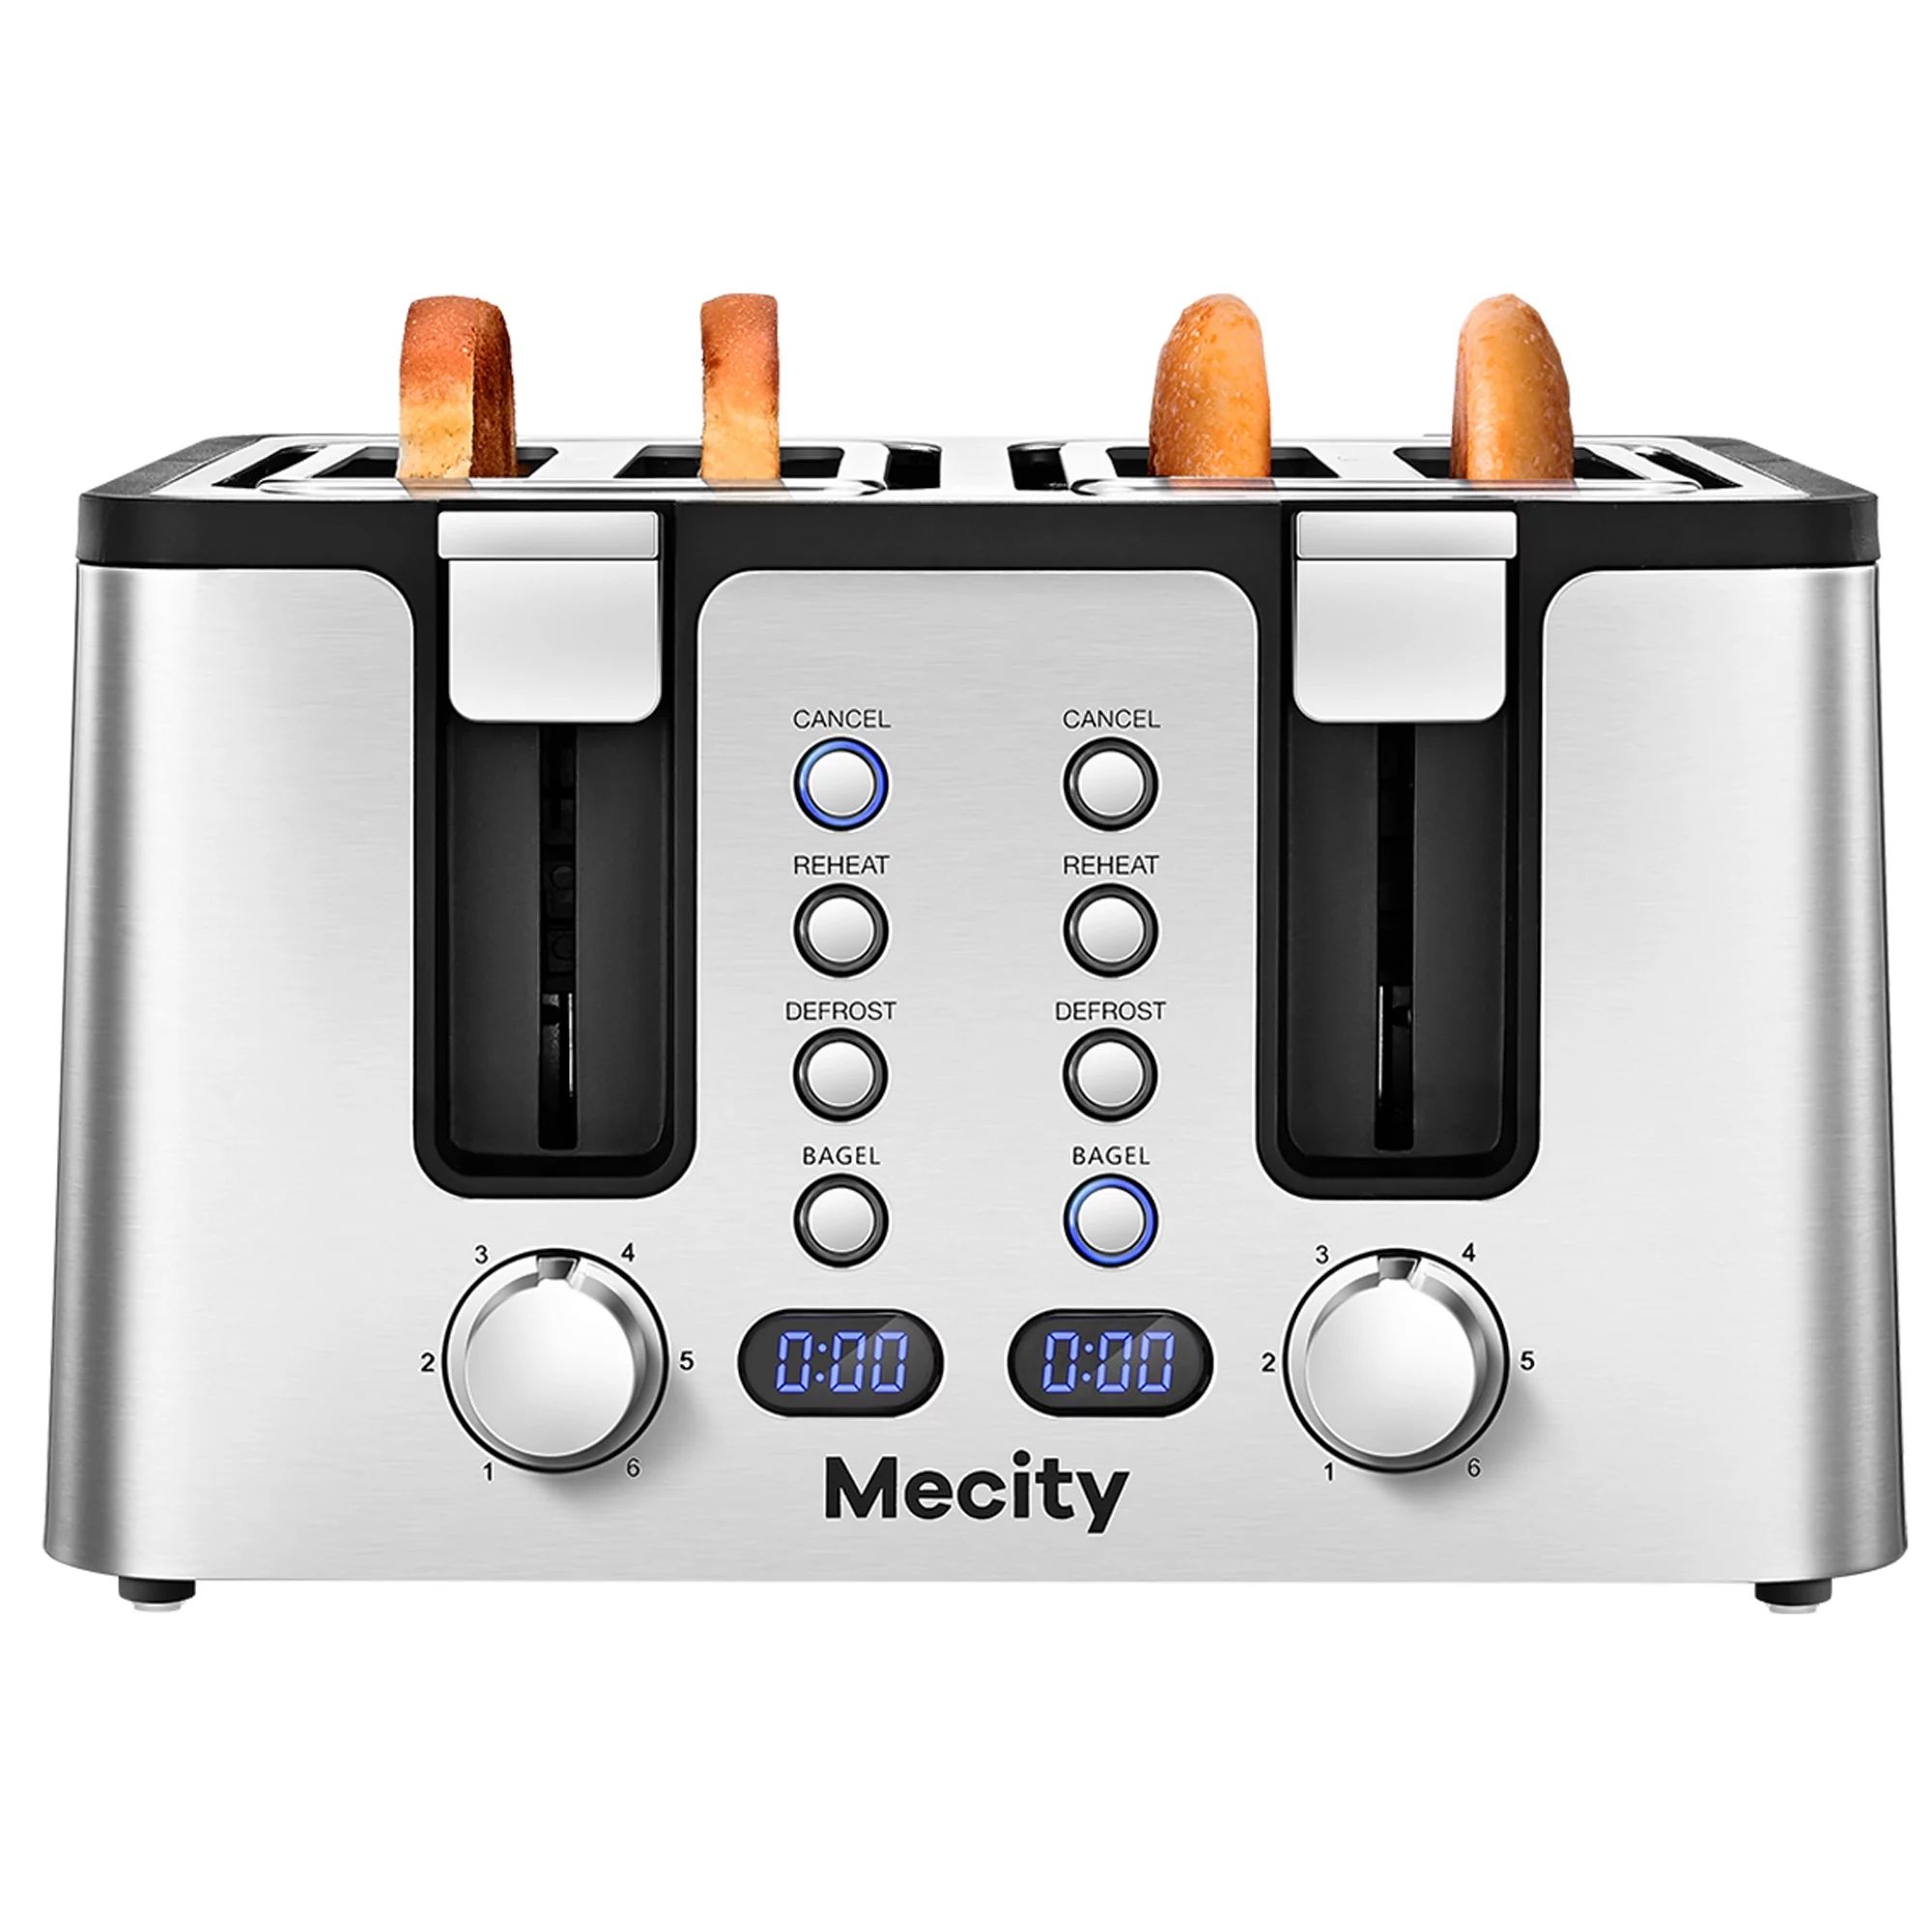 Mecity 4 Slice Toaster, Stainless Steel 4 Slot Toaster With Countdown Timer, Cool to Touch,Warmin... | Walmart (US)